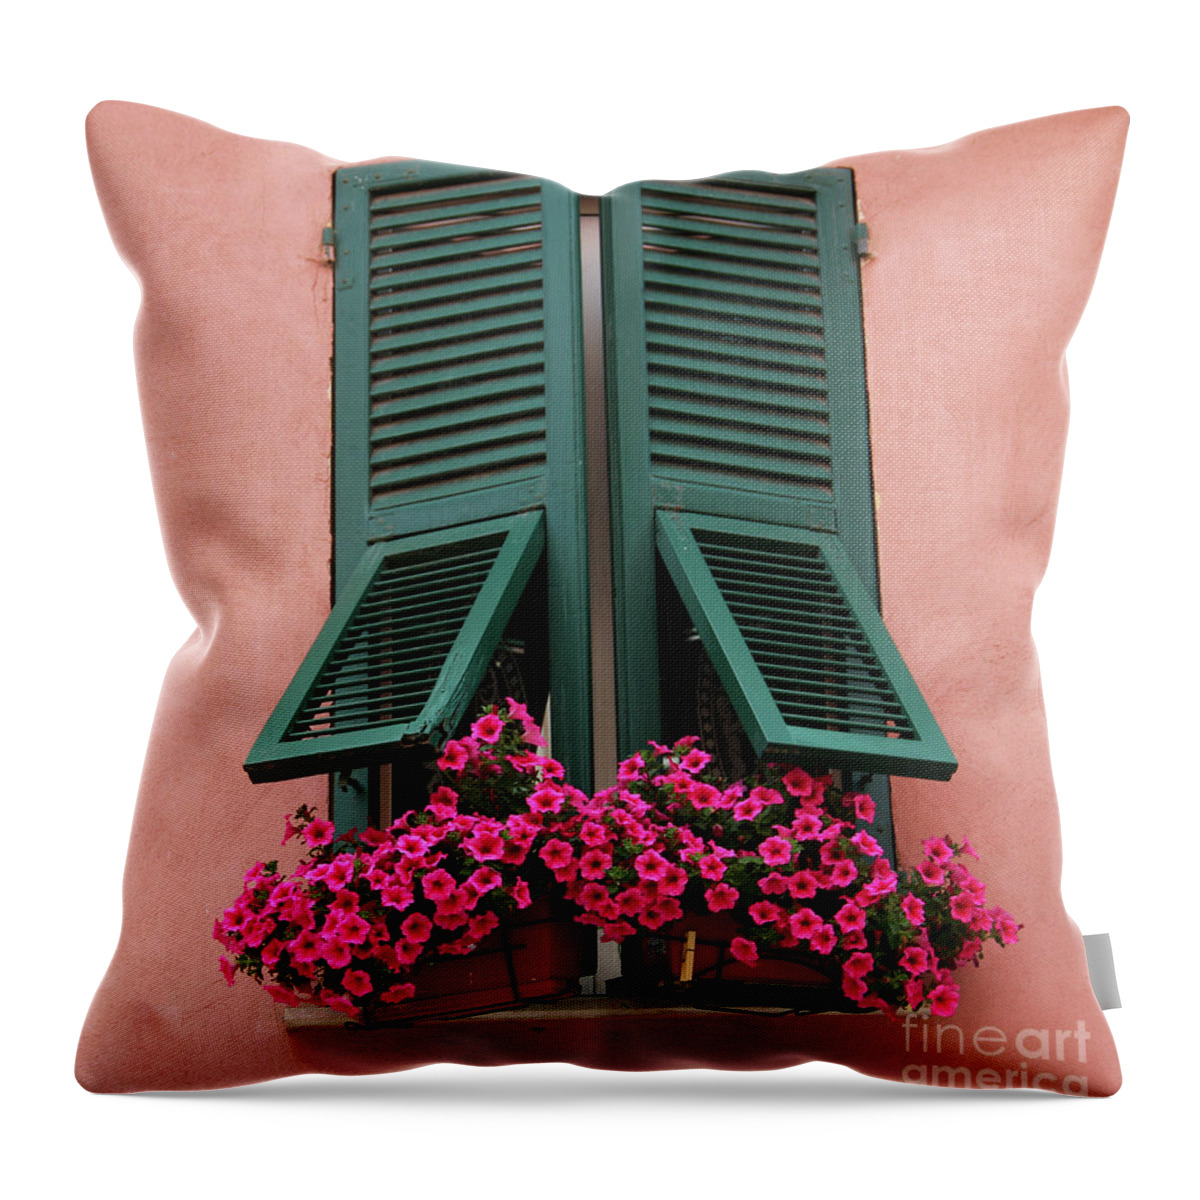 Cinque Terre Throw Pillow featuring the photograph Cinque Terre Window Flowers 0729 by Jack Schultz